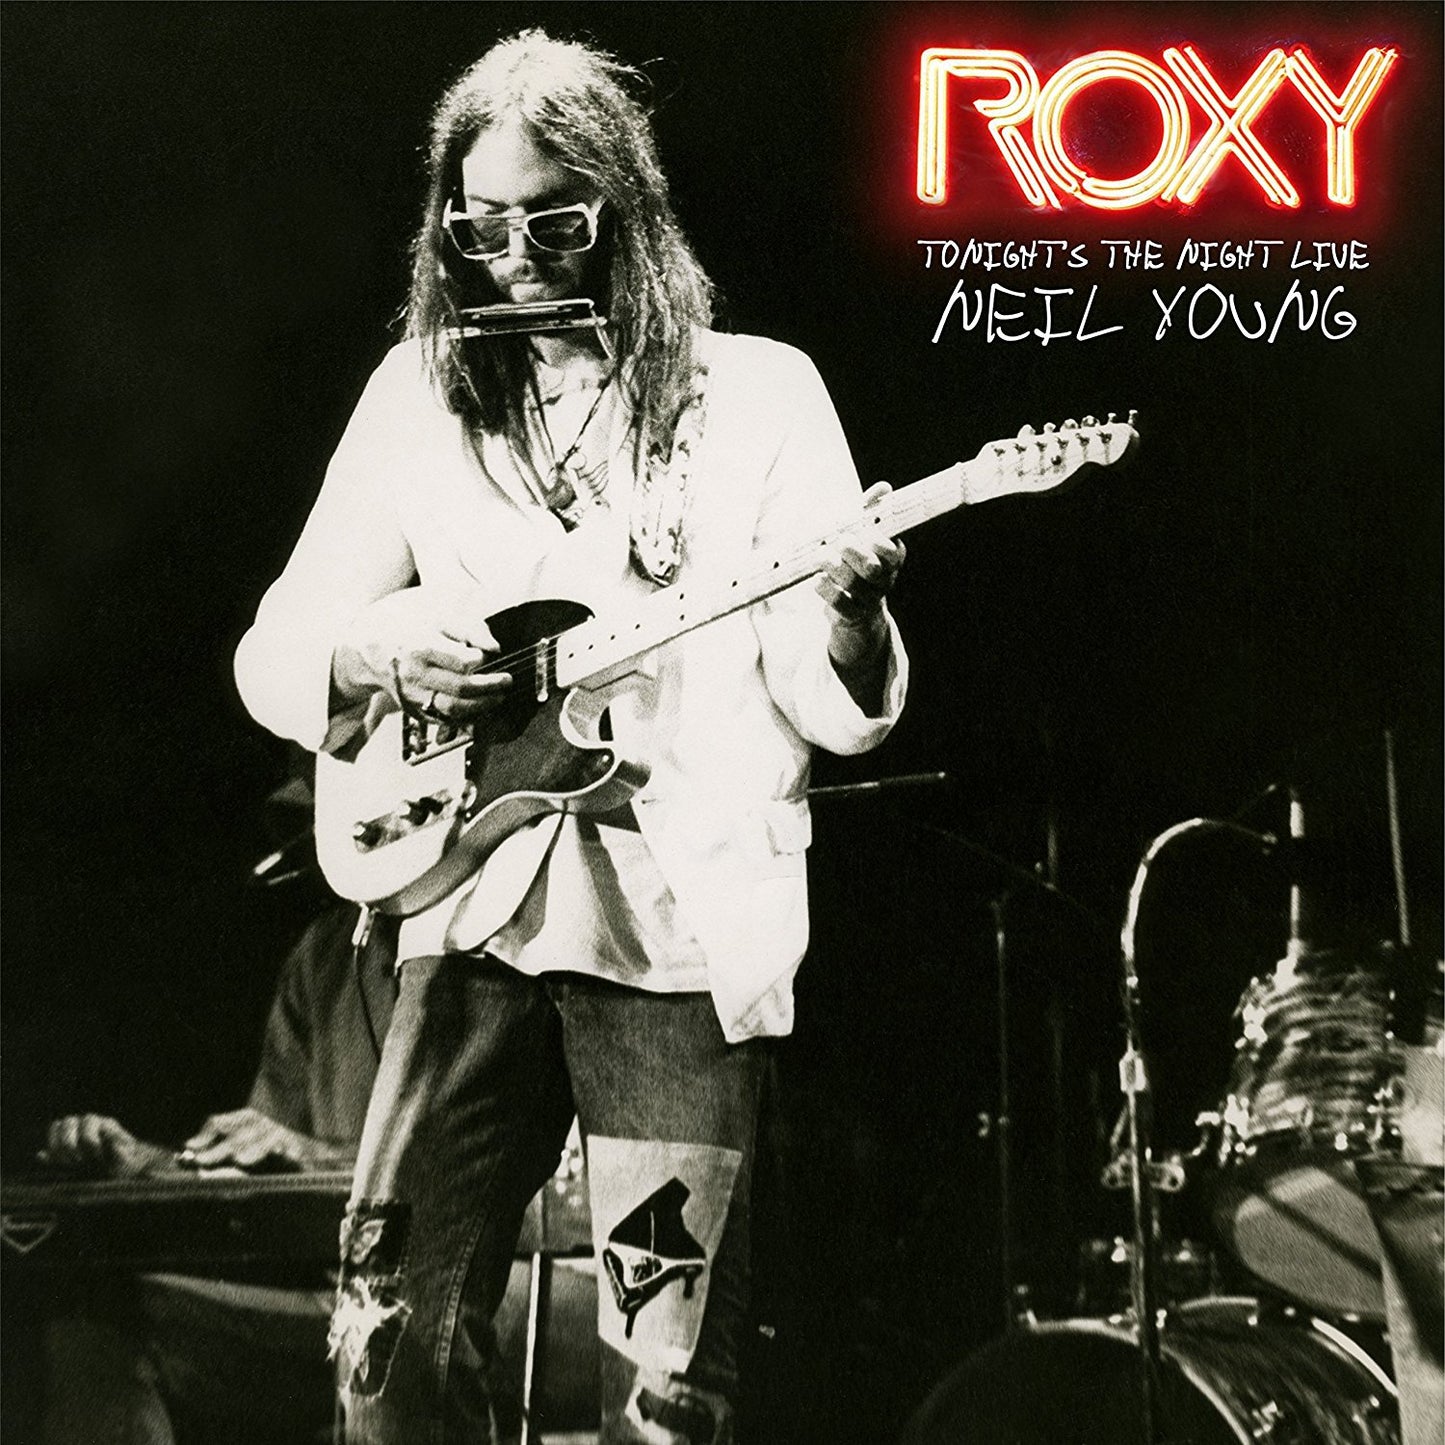 Neil Young - Roxy: Tonight's The Night Live - 2LP